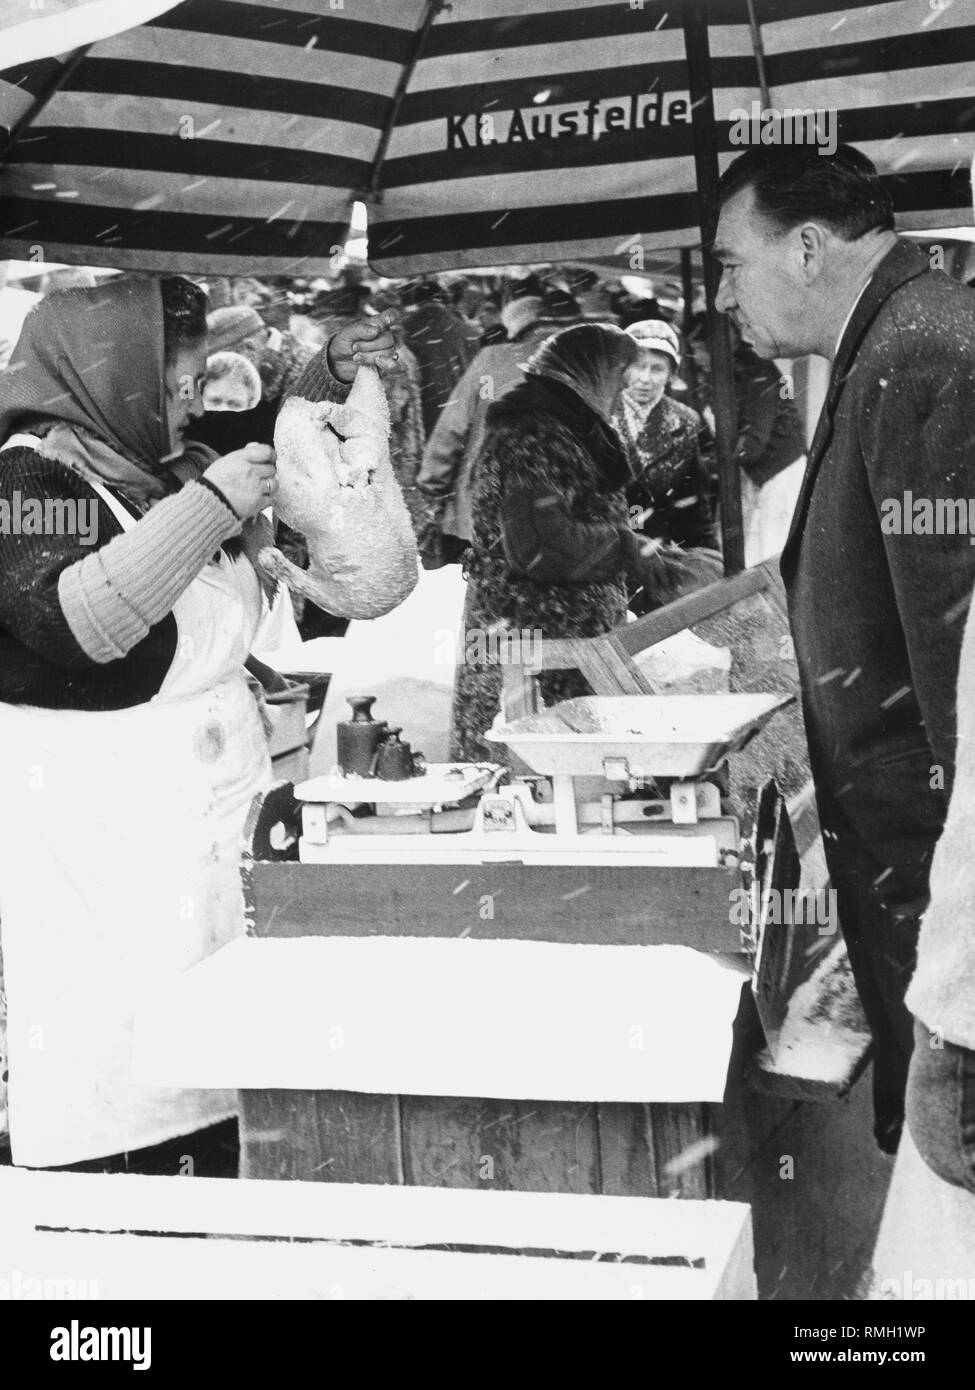 Market stall selling poultry and Christmas roast on the Viktualienmarkt in winter 1961. Stock Photo